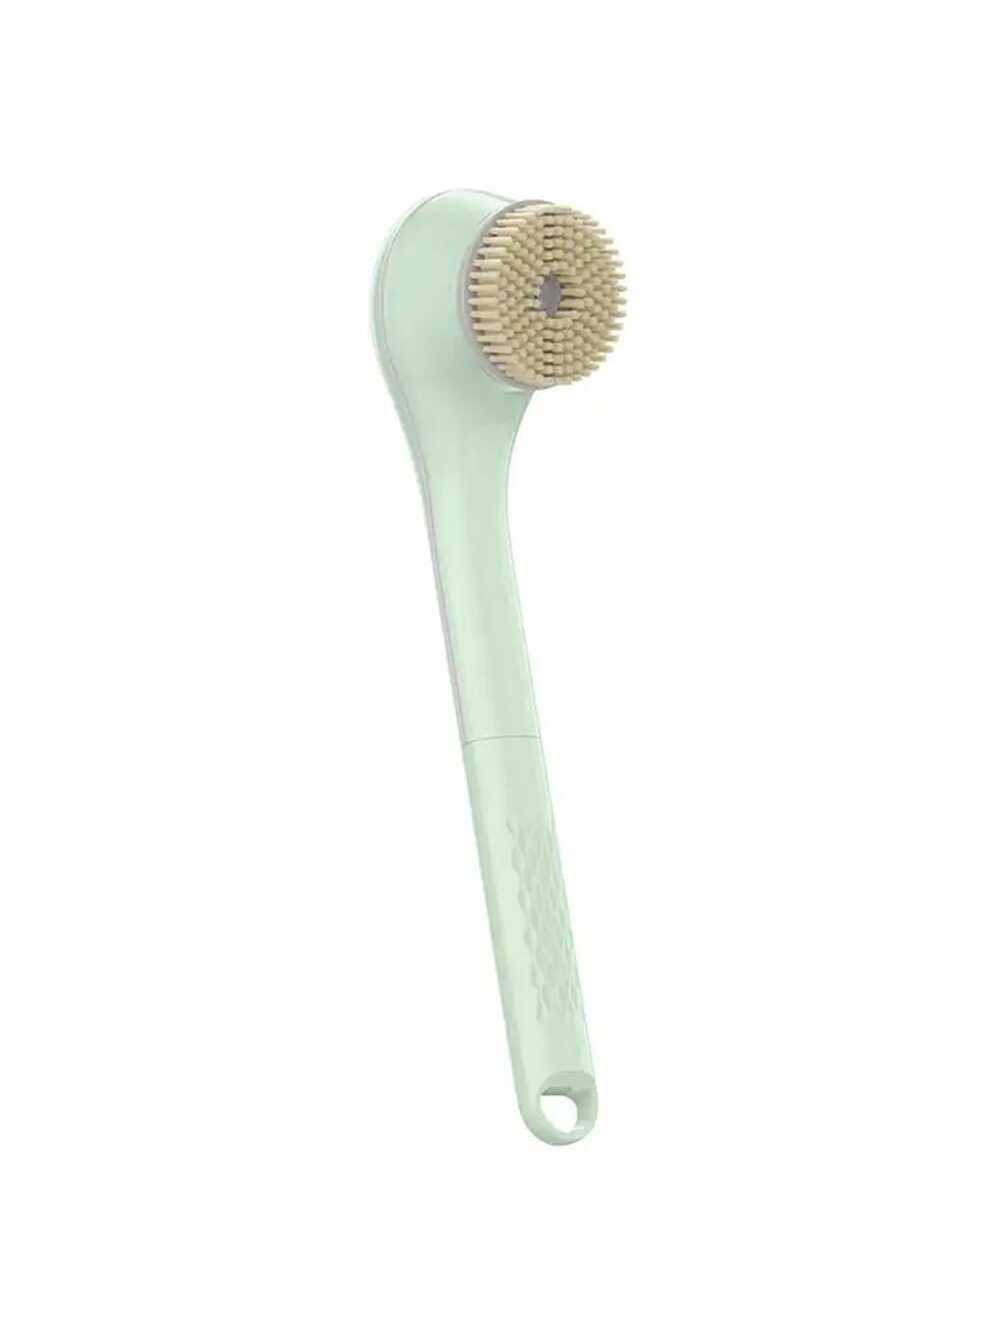 1pc Electric Rotating Bath Brush, Green, Multi-functional Back Scrubber, Lazy Bathing Tool With 6 Brush Heads-Green-2